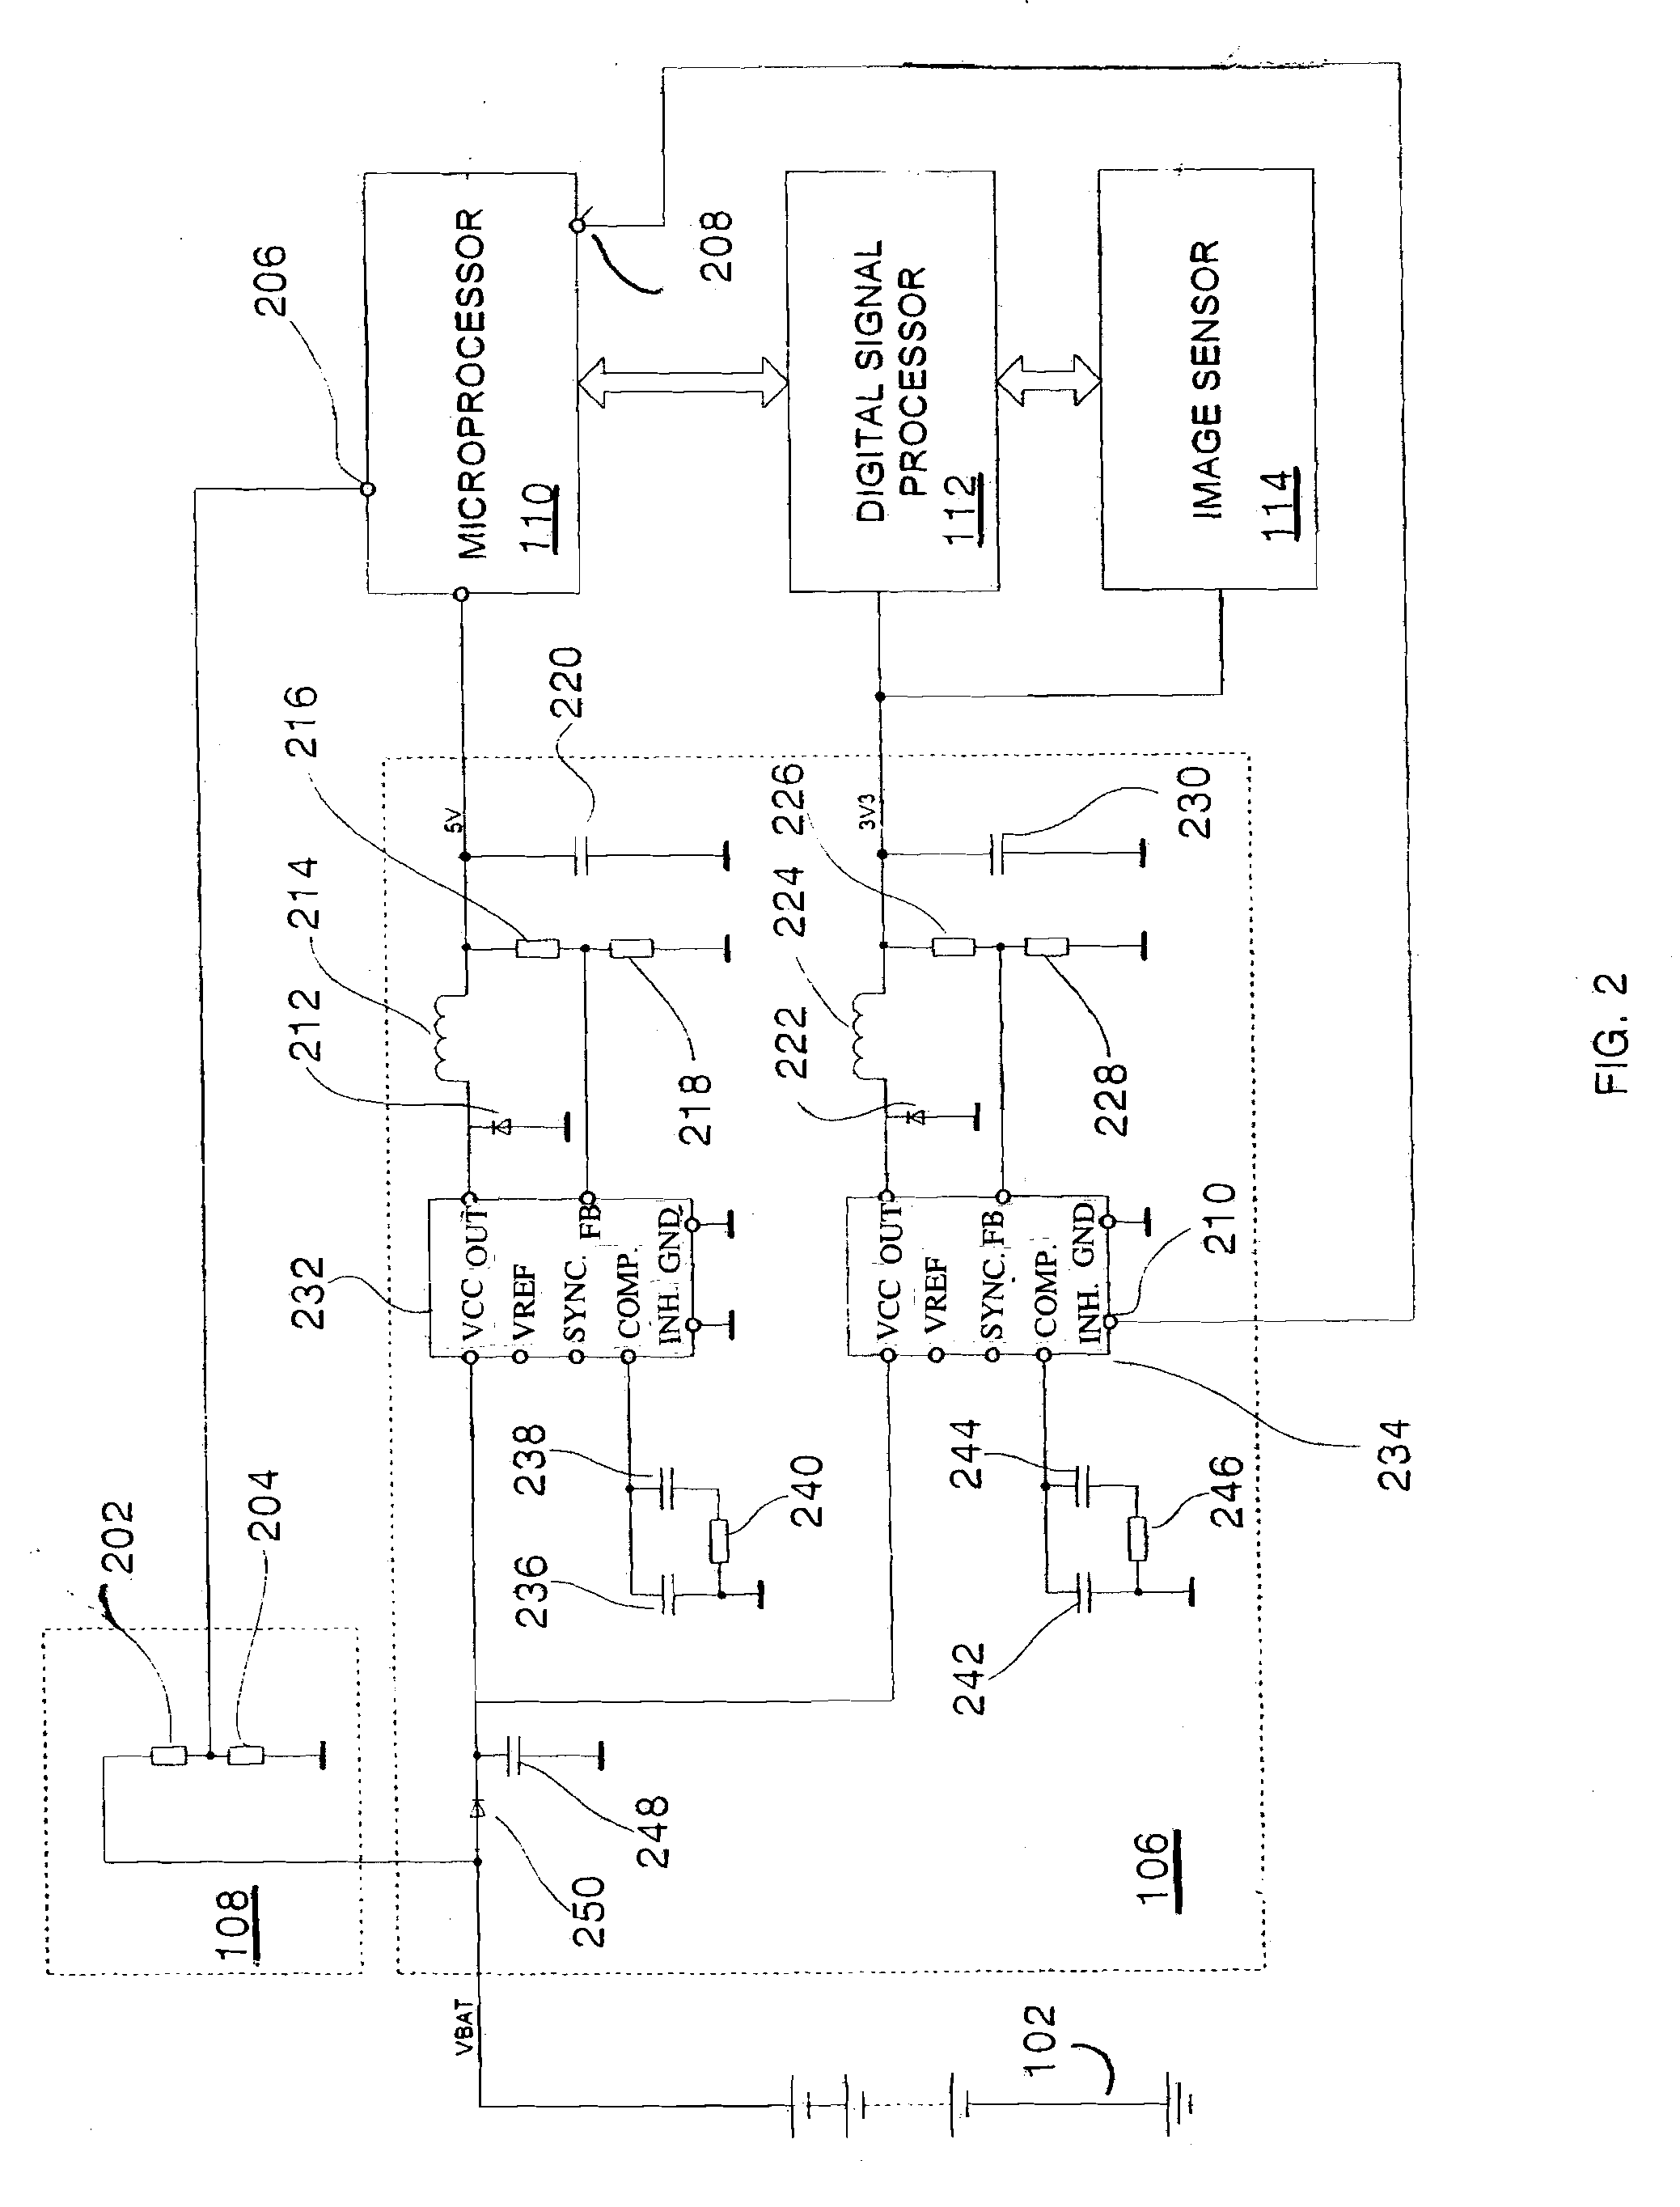 Electronic Control Unit with Power Loss Compensation